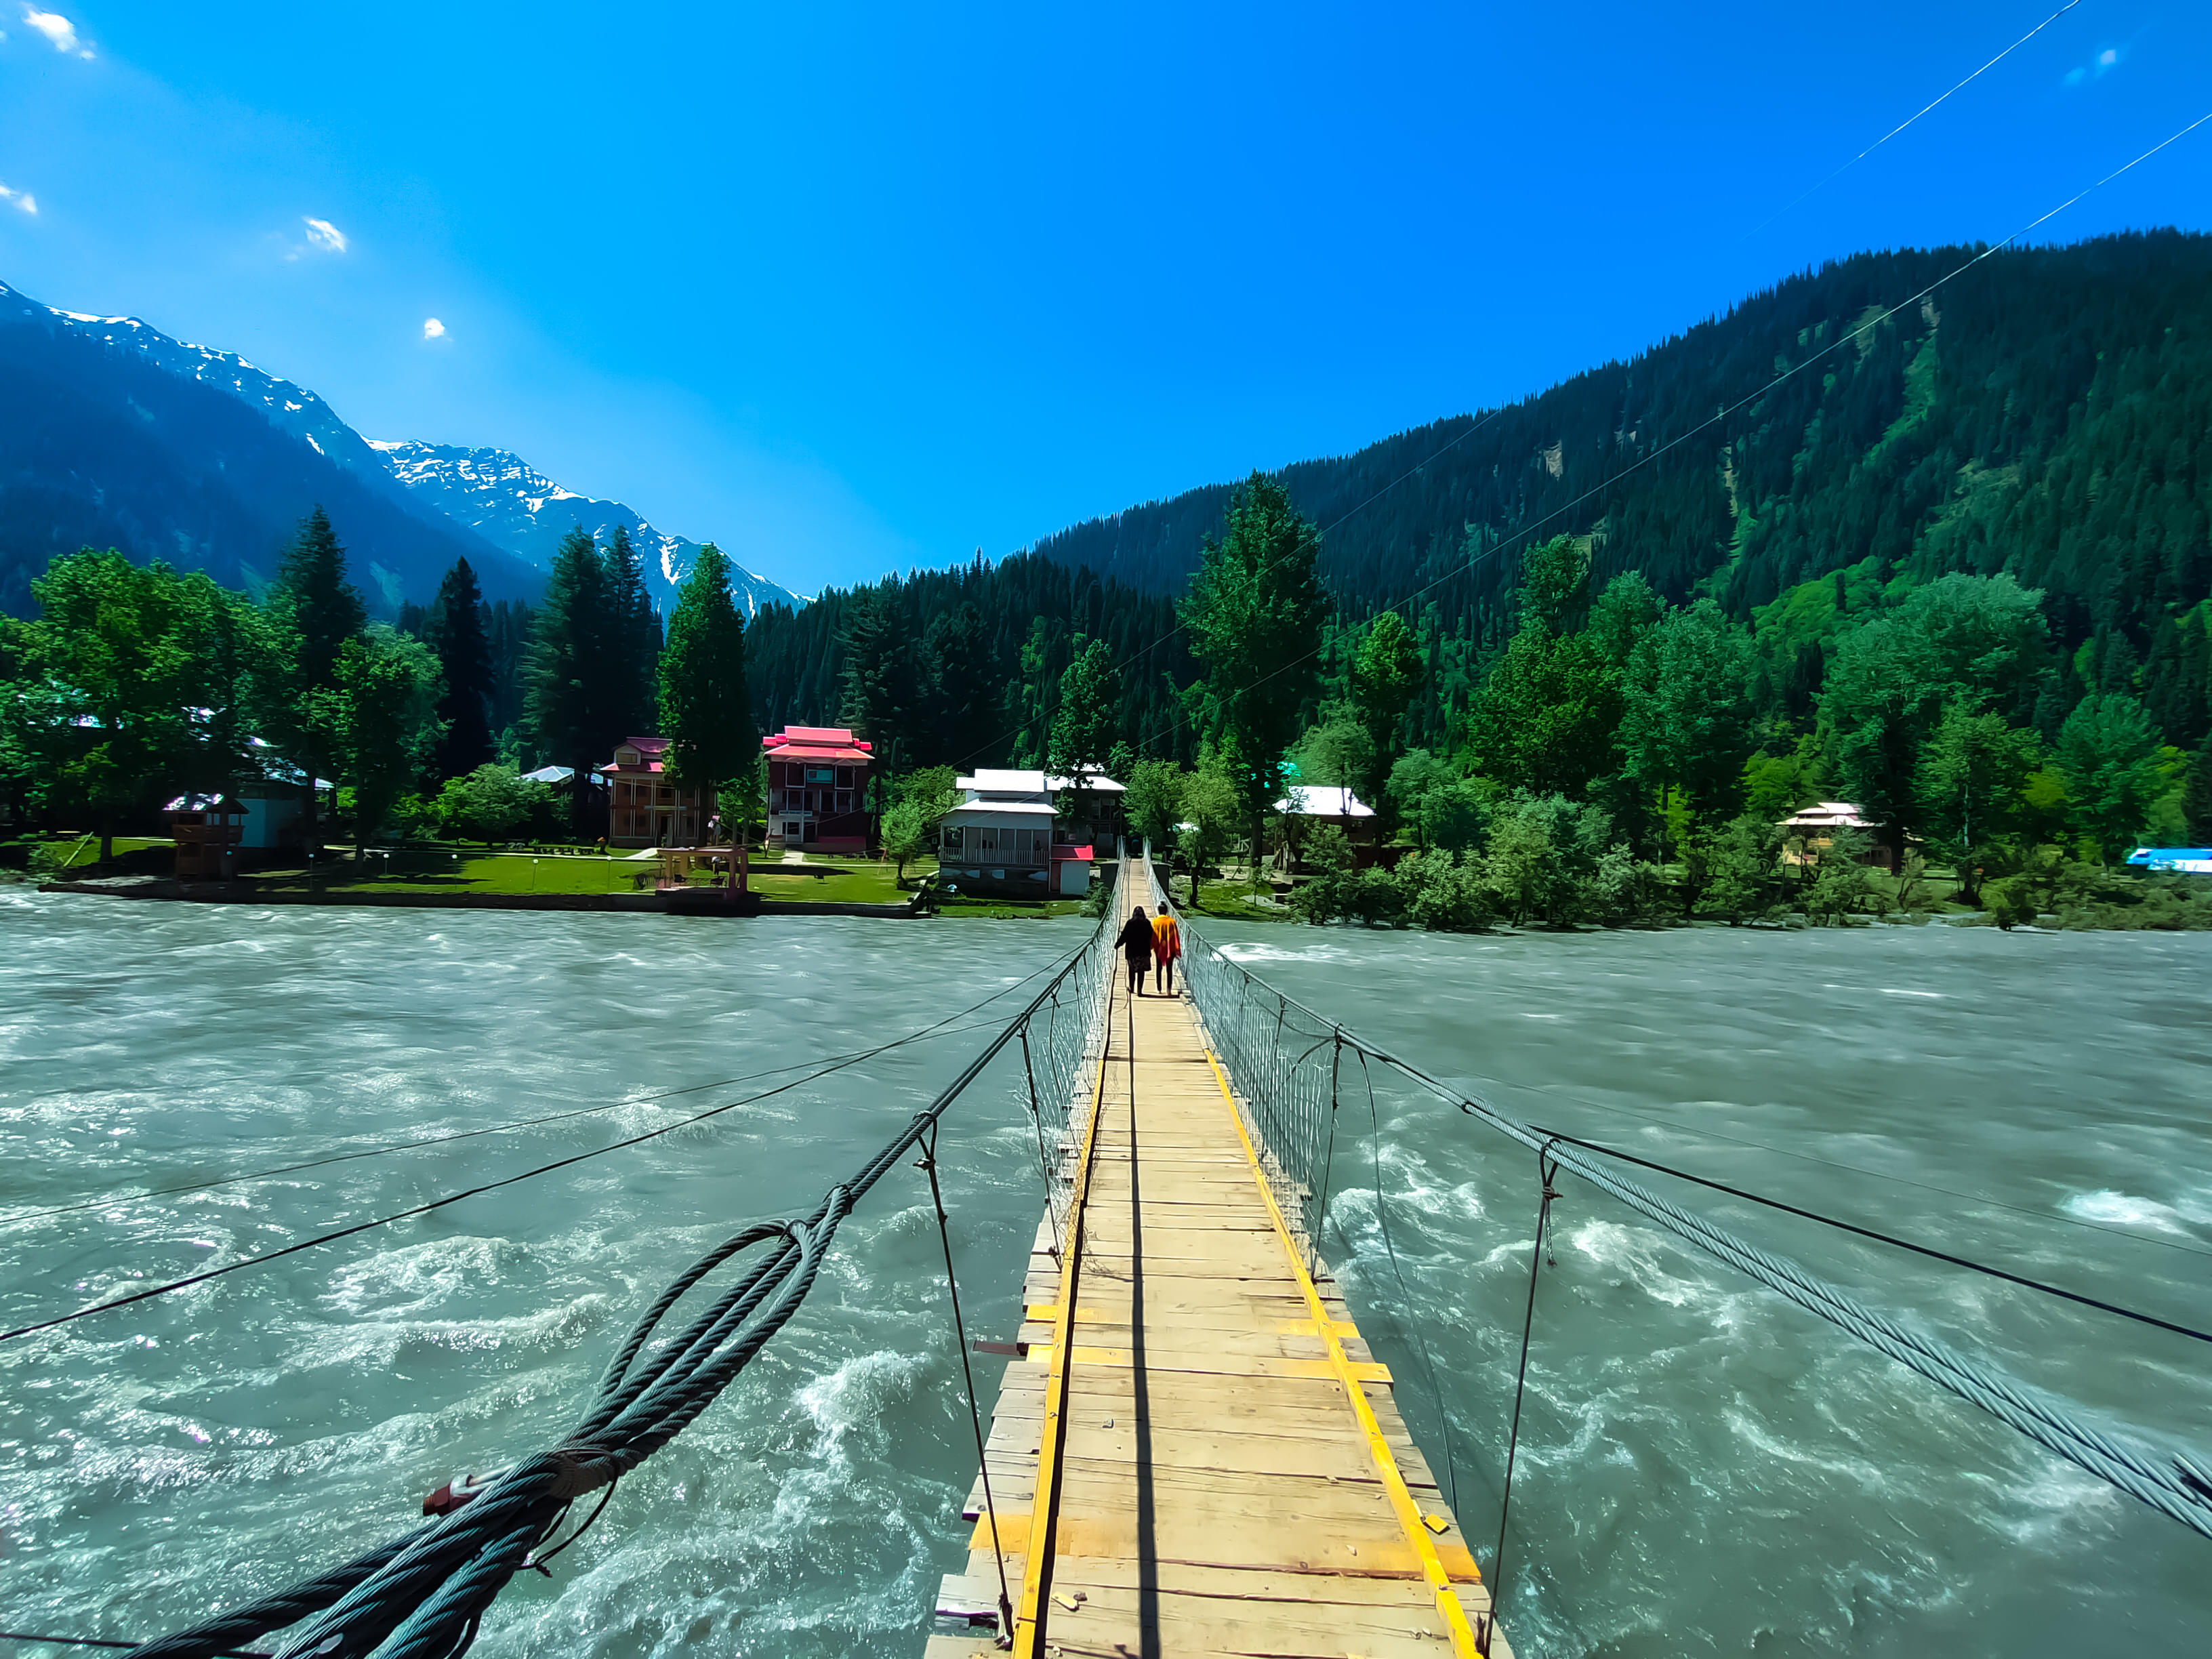 Kashmir Packages from Mumbai | Get Upto 50% Off